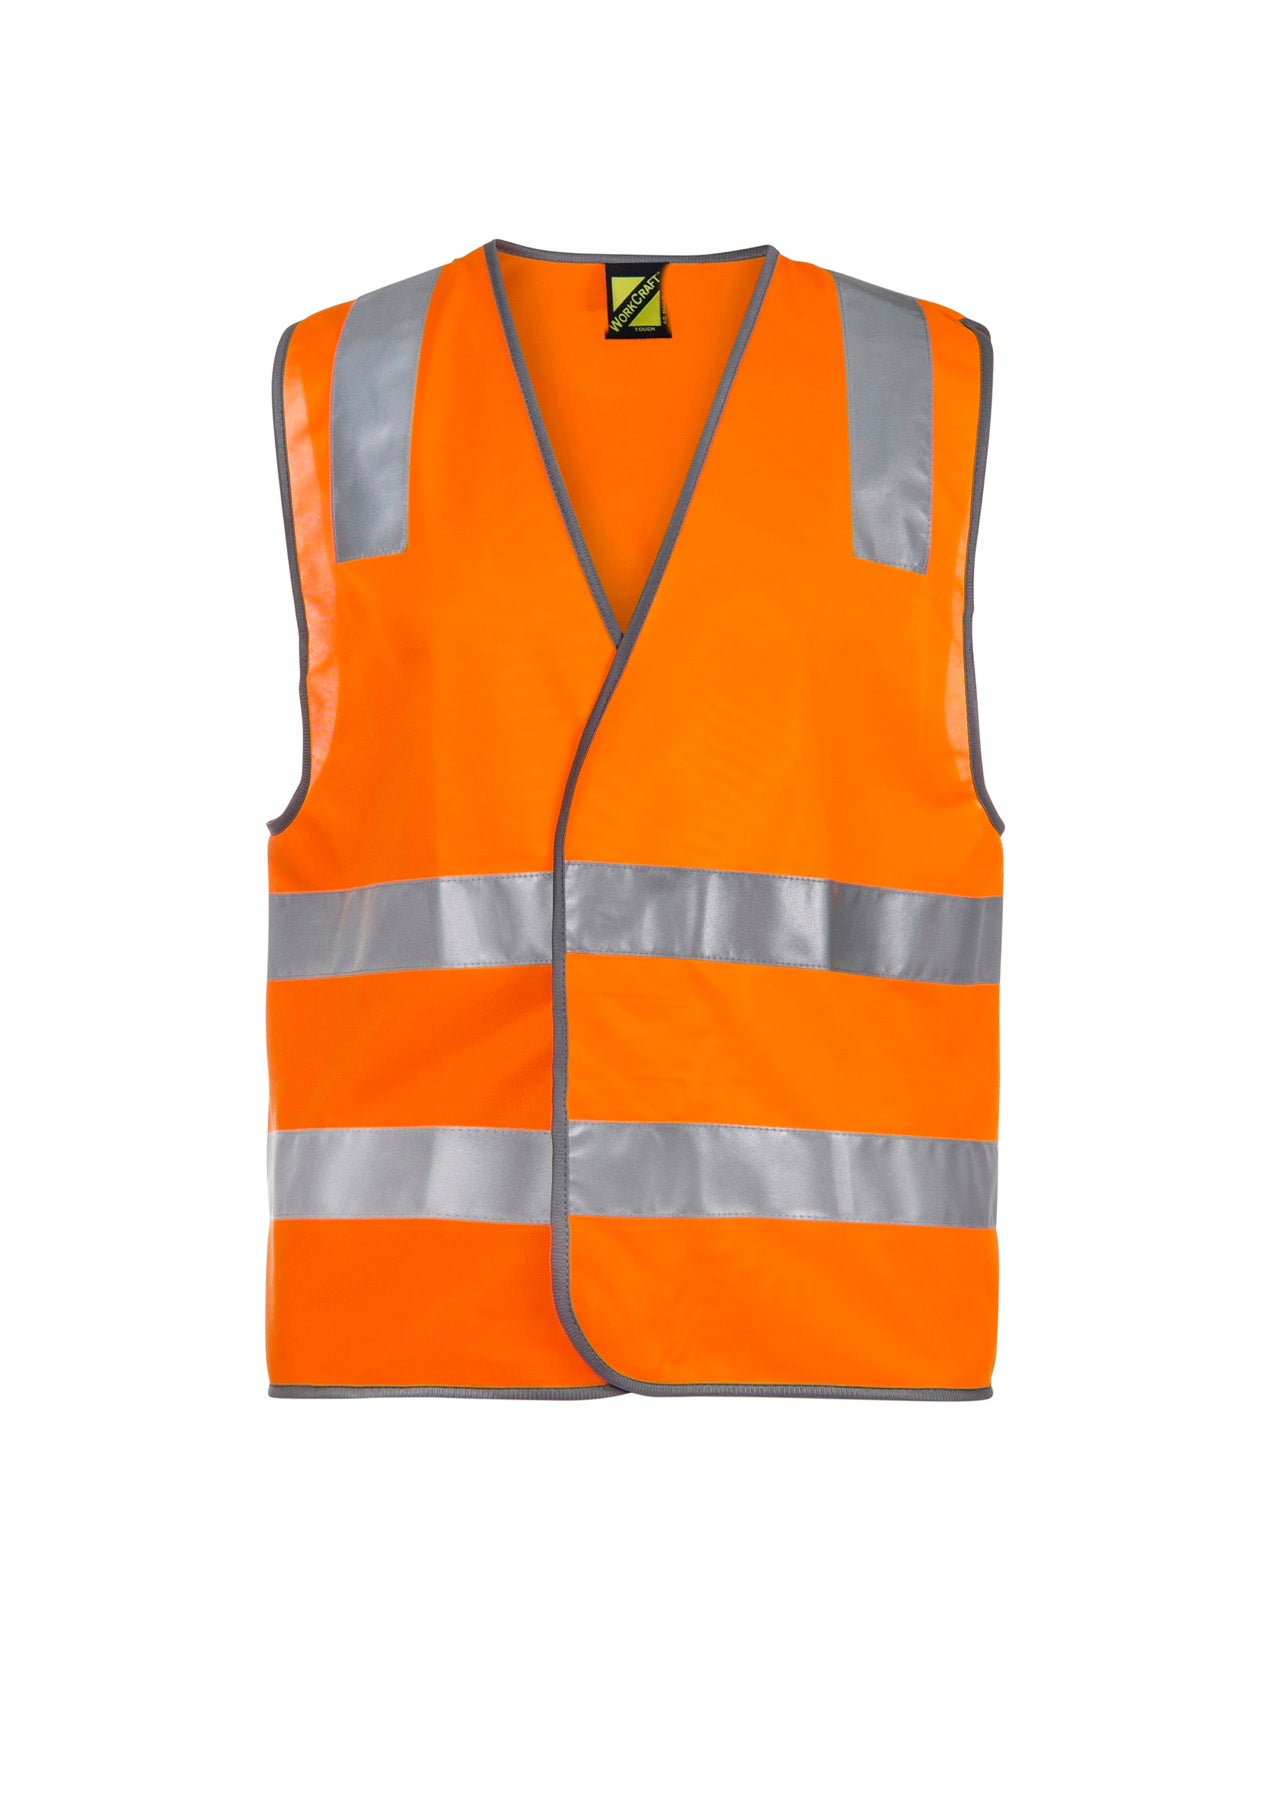 Adult Hi Vis Vest With Tape - made by Workcraft